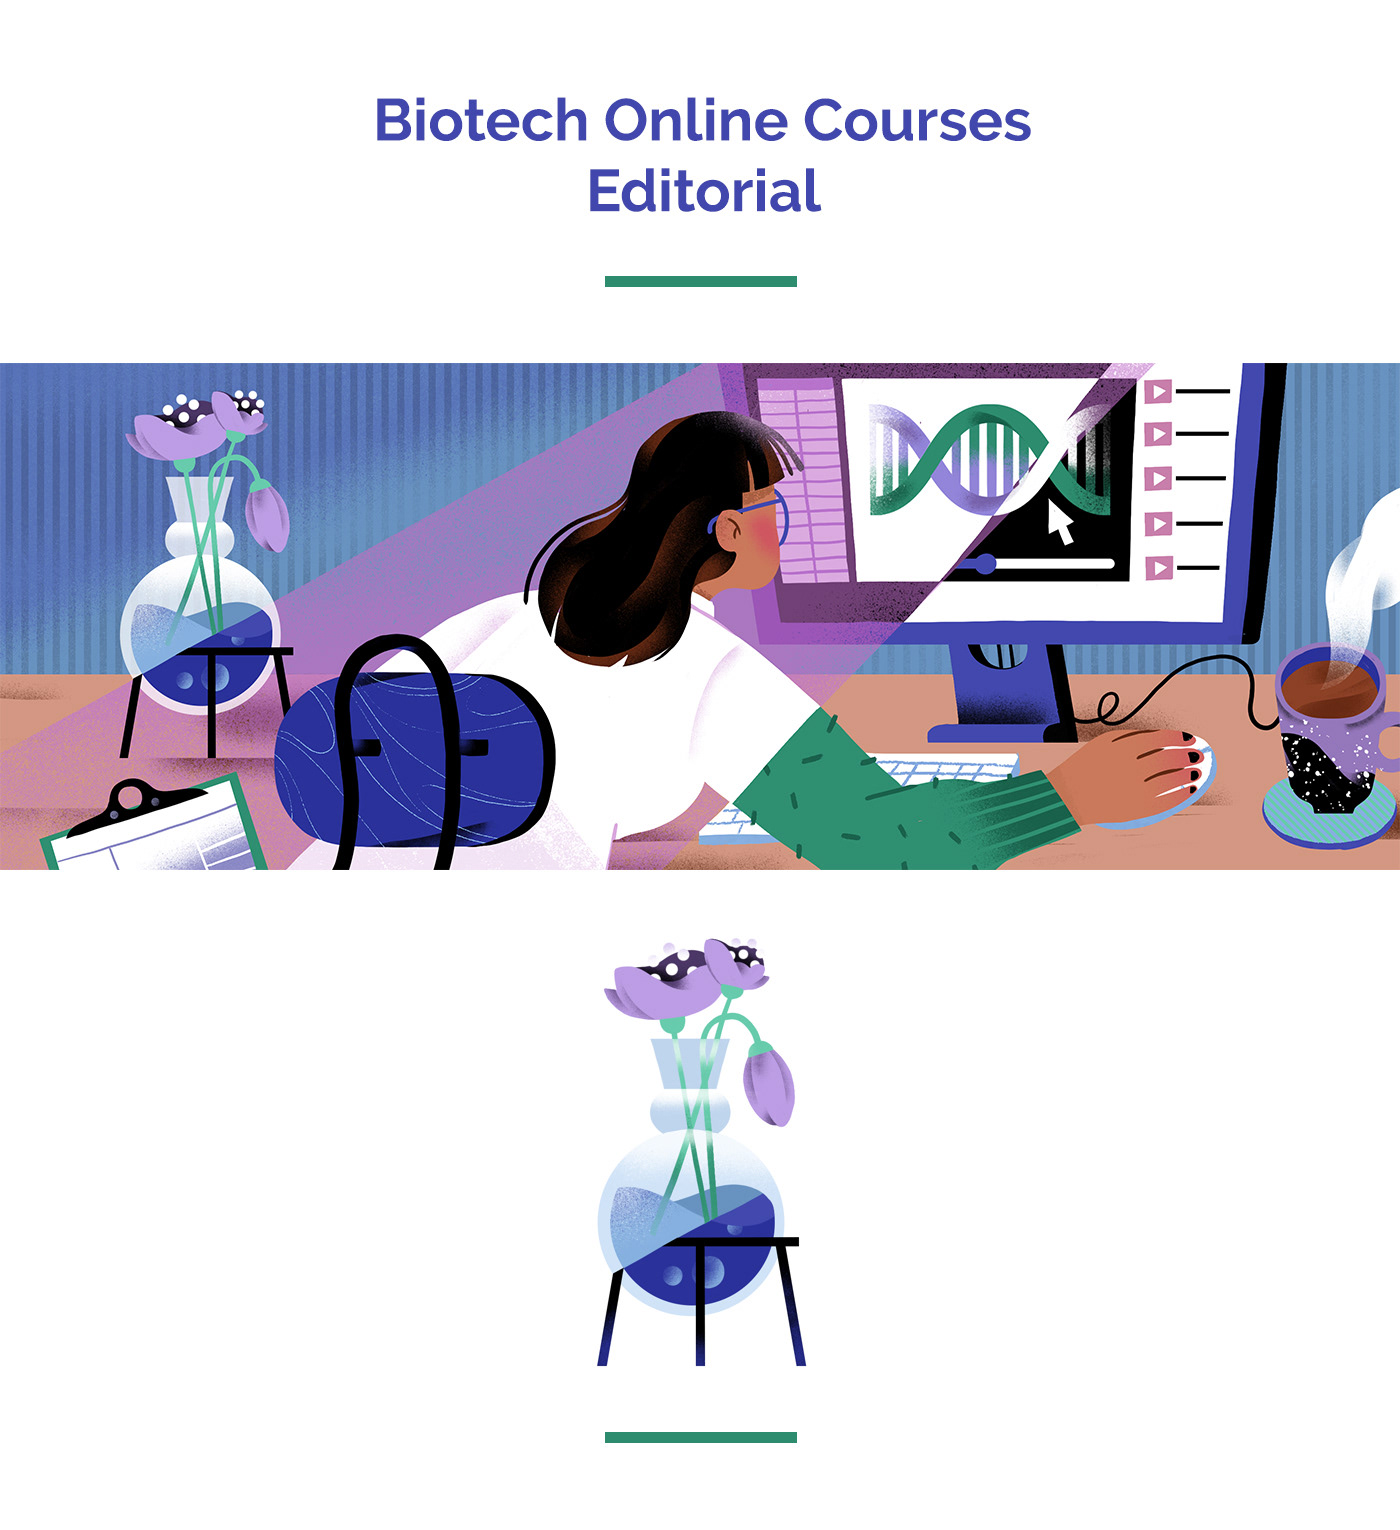 biotech Education online courses lab science Scientist editorial Editorial Illustration